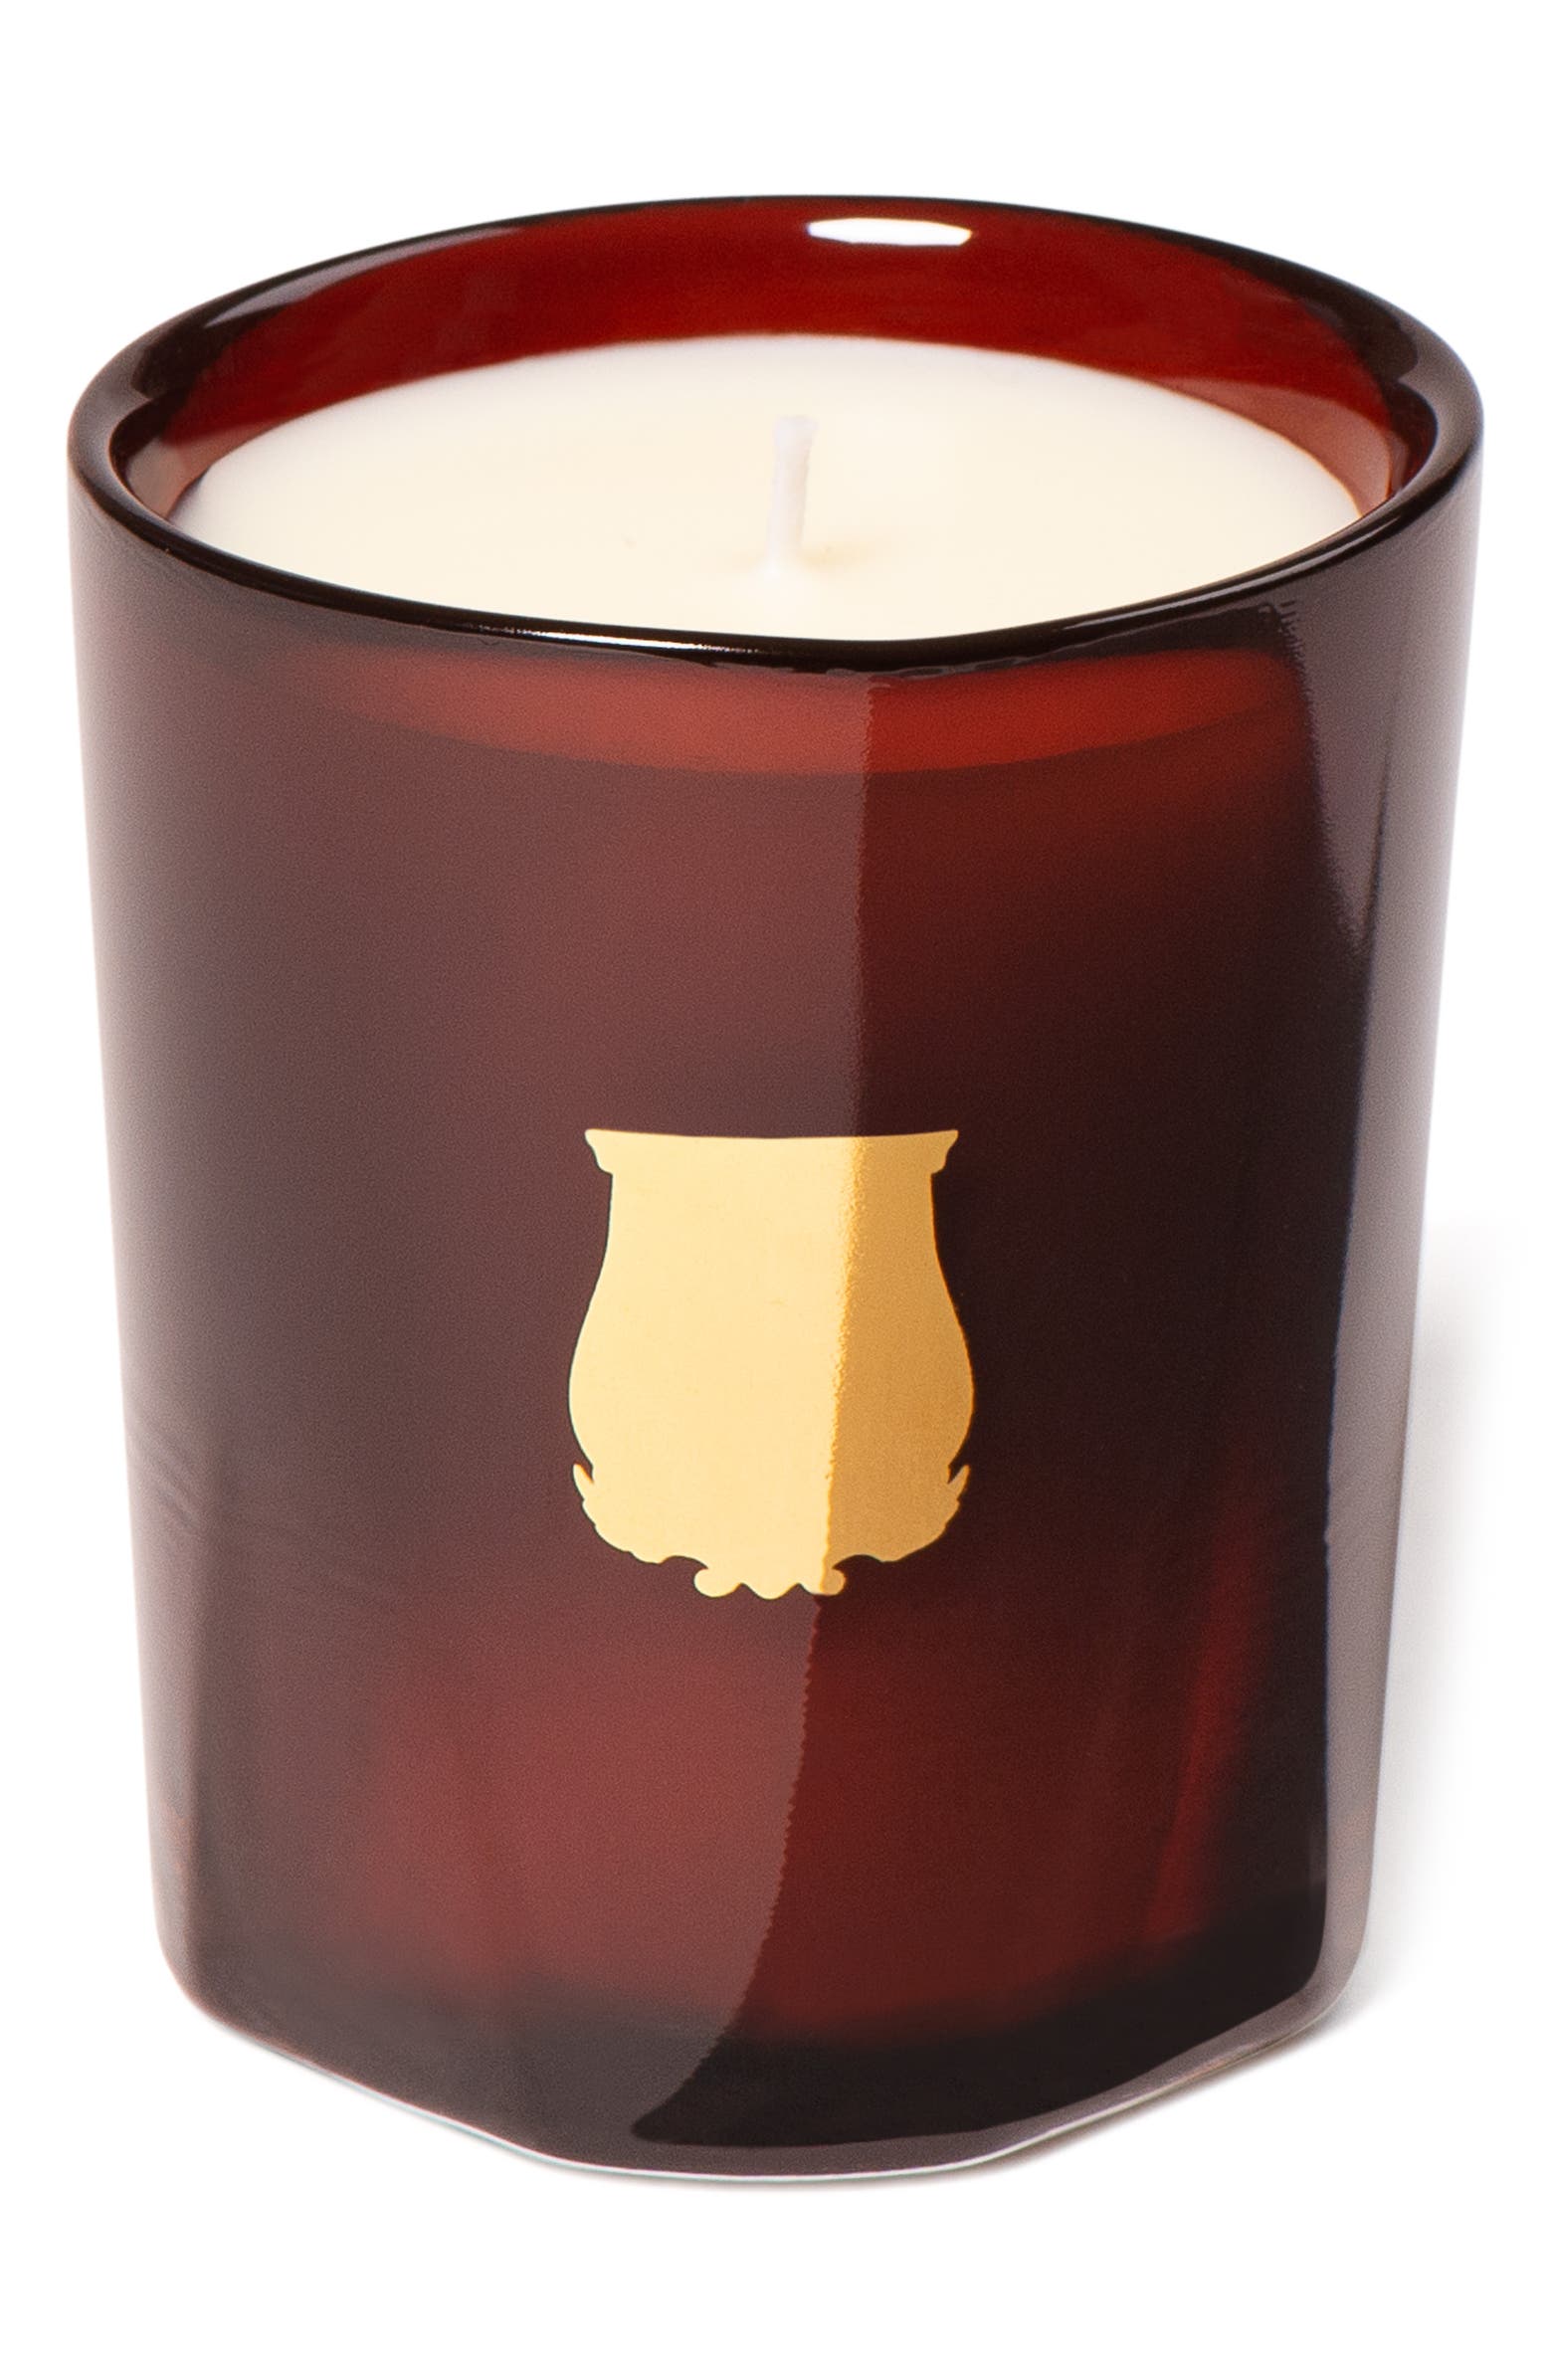 Trudon Cire Scented Candle | Nordstrom